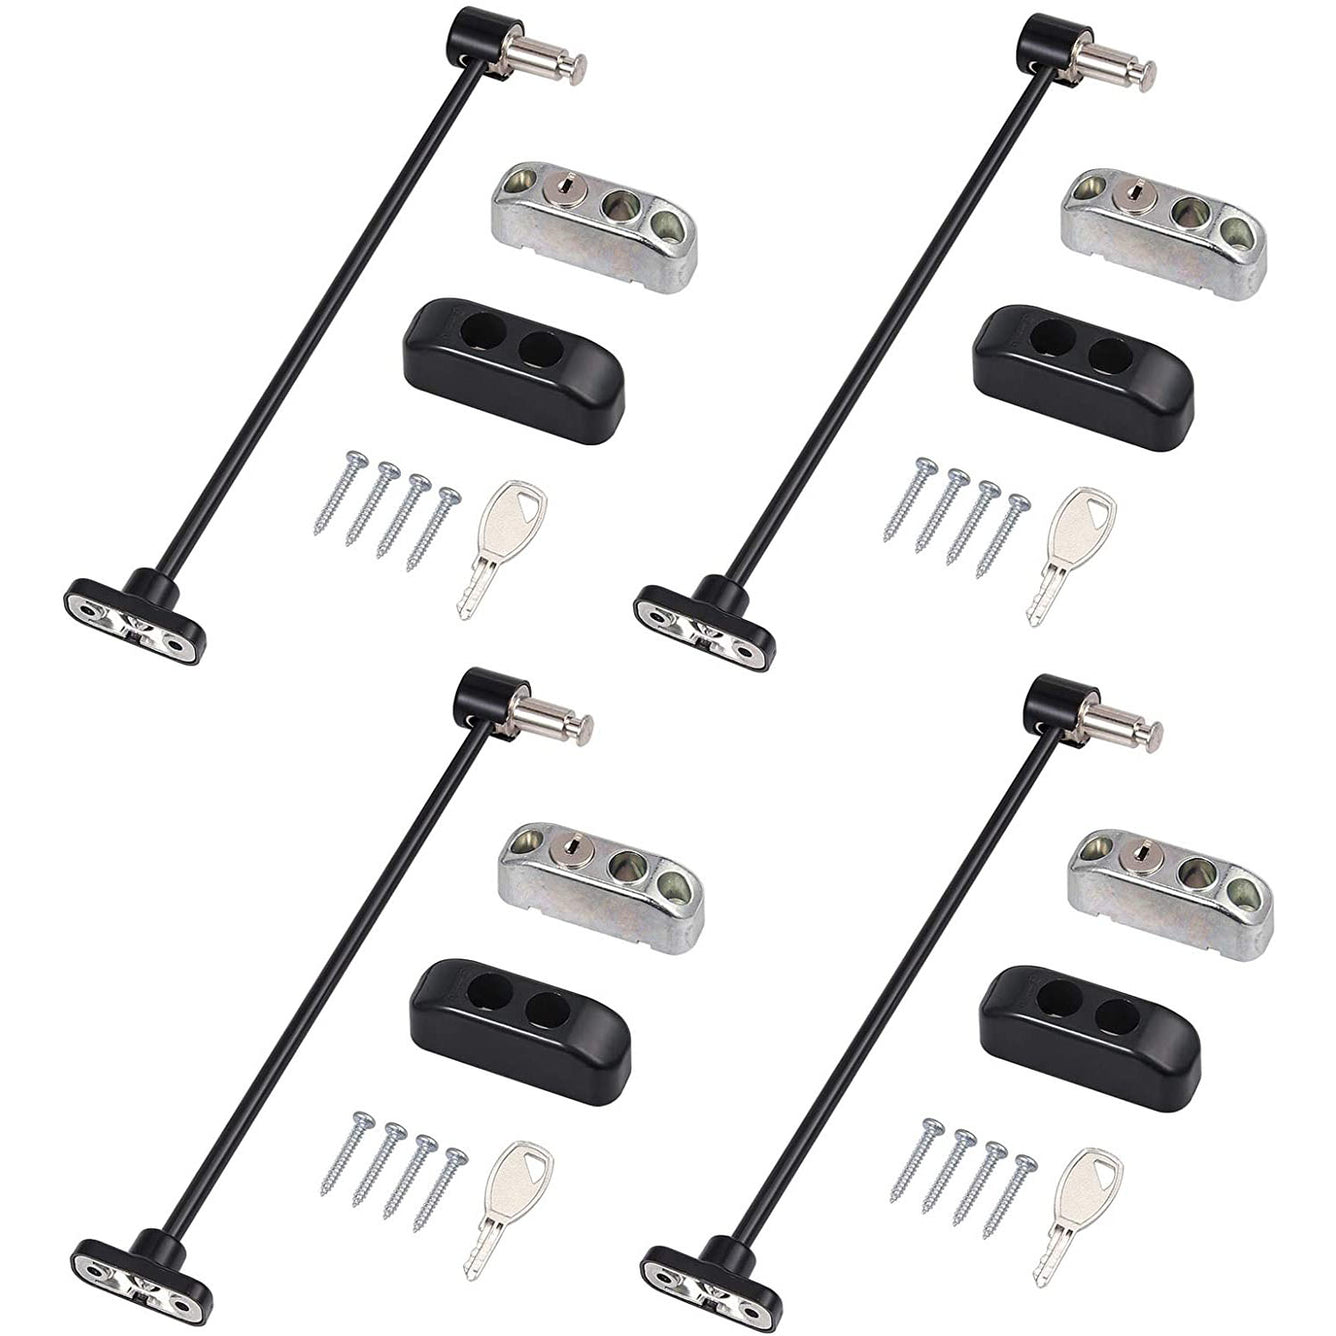 Proster Window Restrictor Locks 4 PCS Security Cable Black